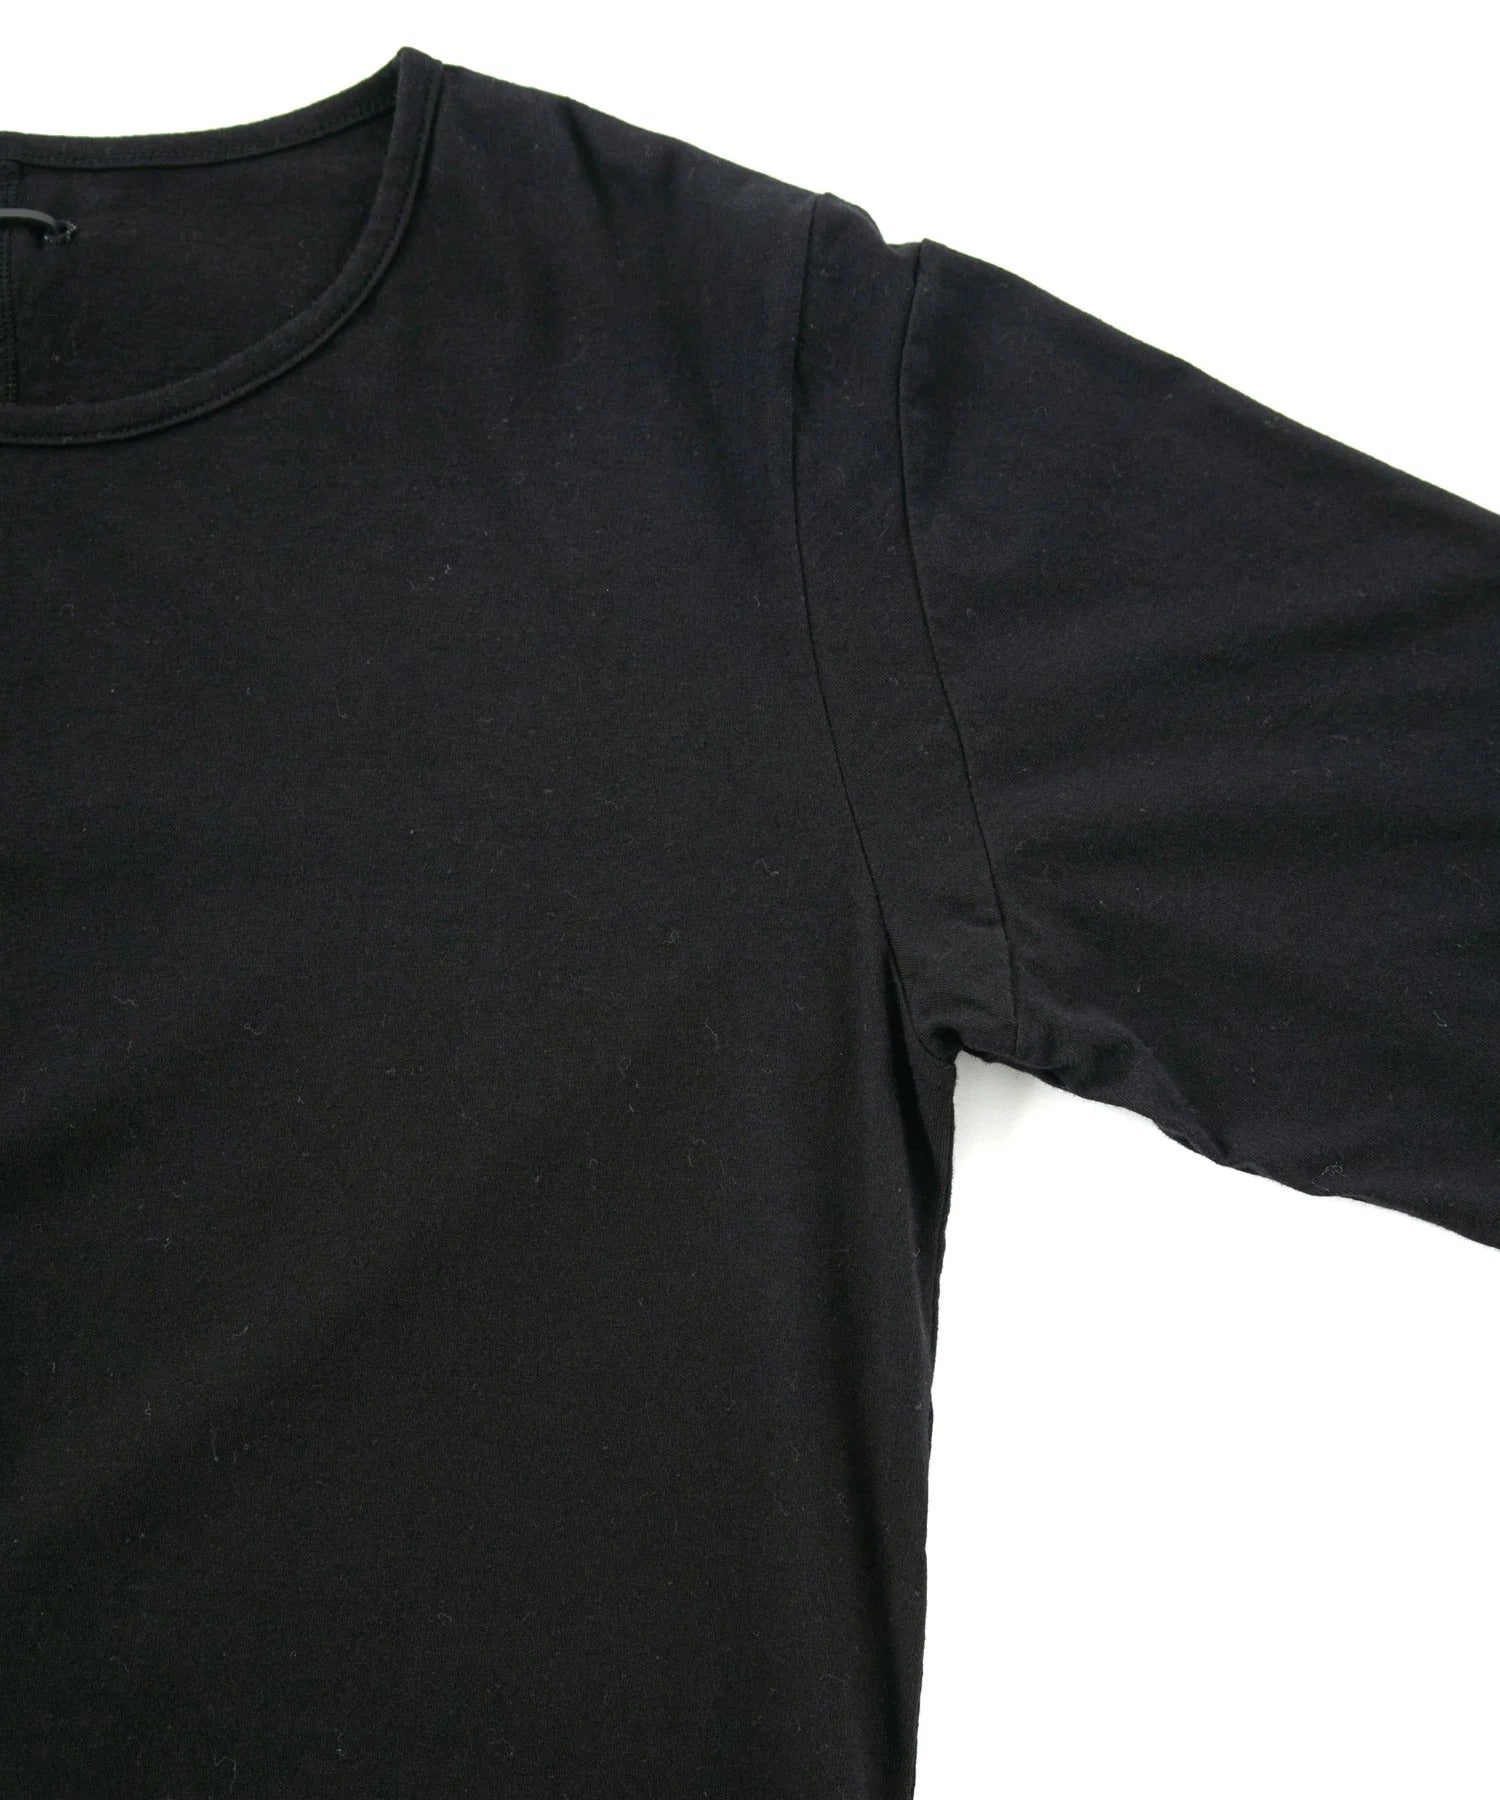 Load image into Gallery viewer, Natural Soft Cotton Plain Stitches Crew Neck T-shirt - BLACK